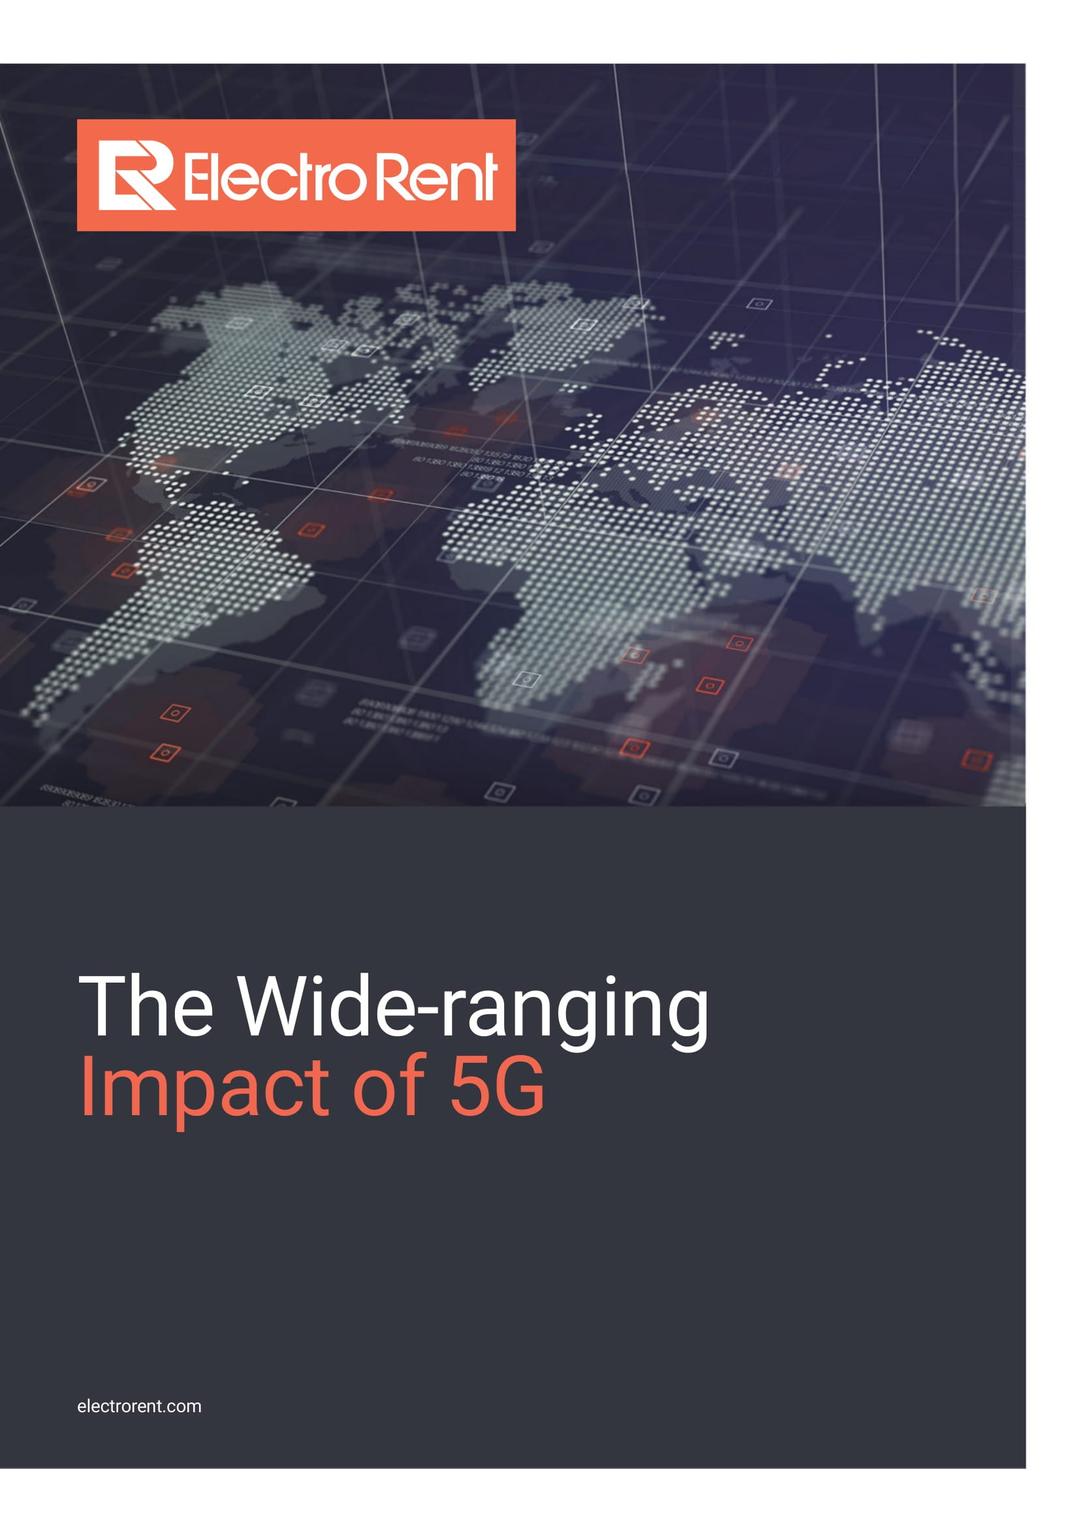 The Wide-ranging Impact of 5G, image